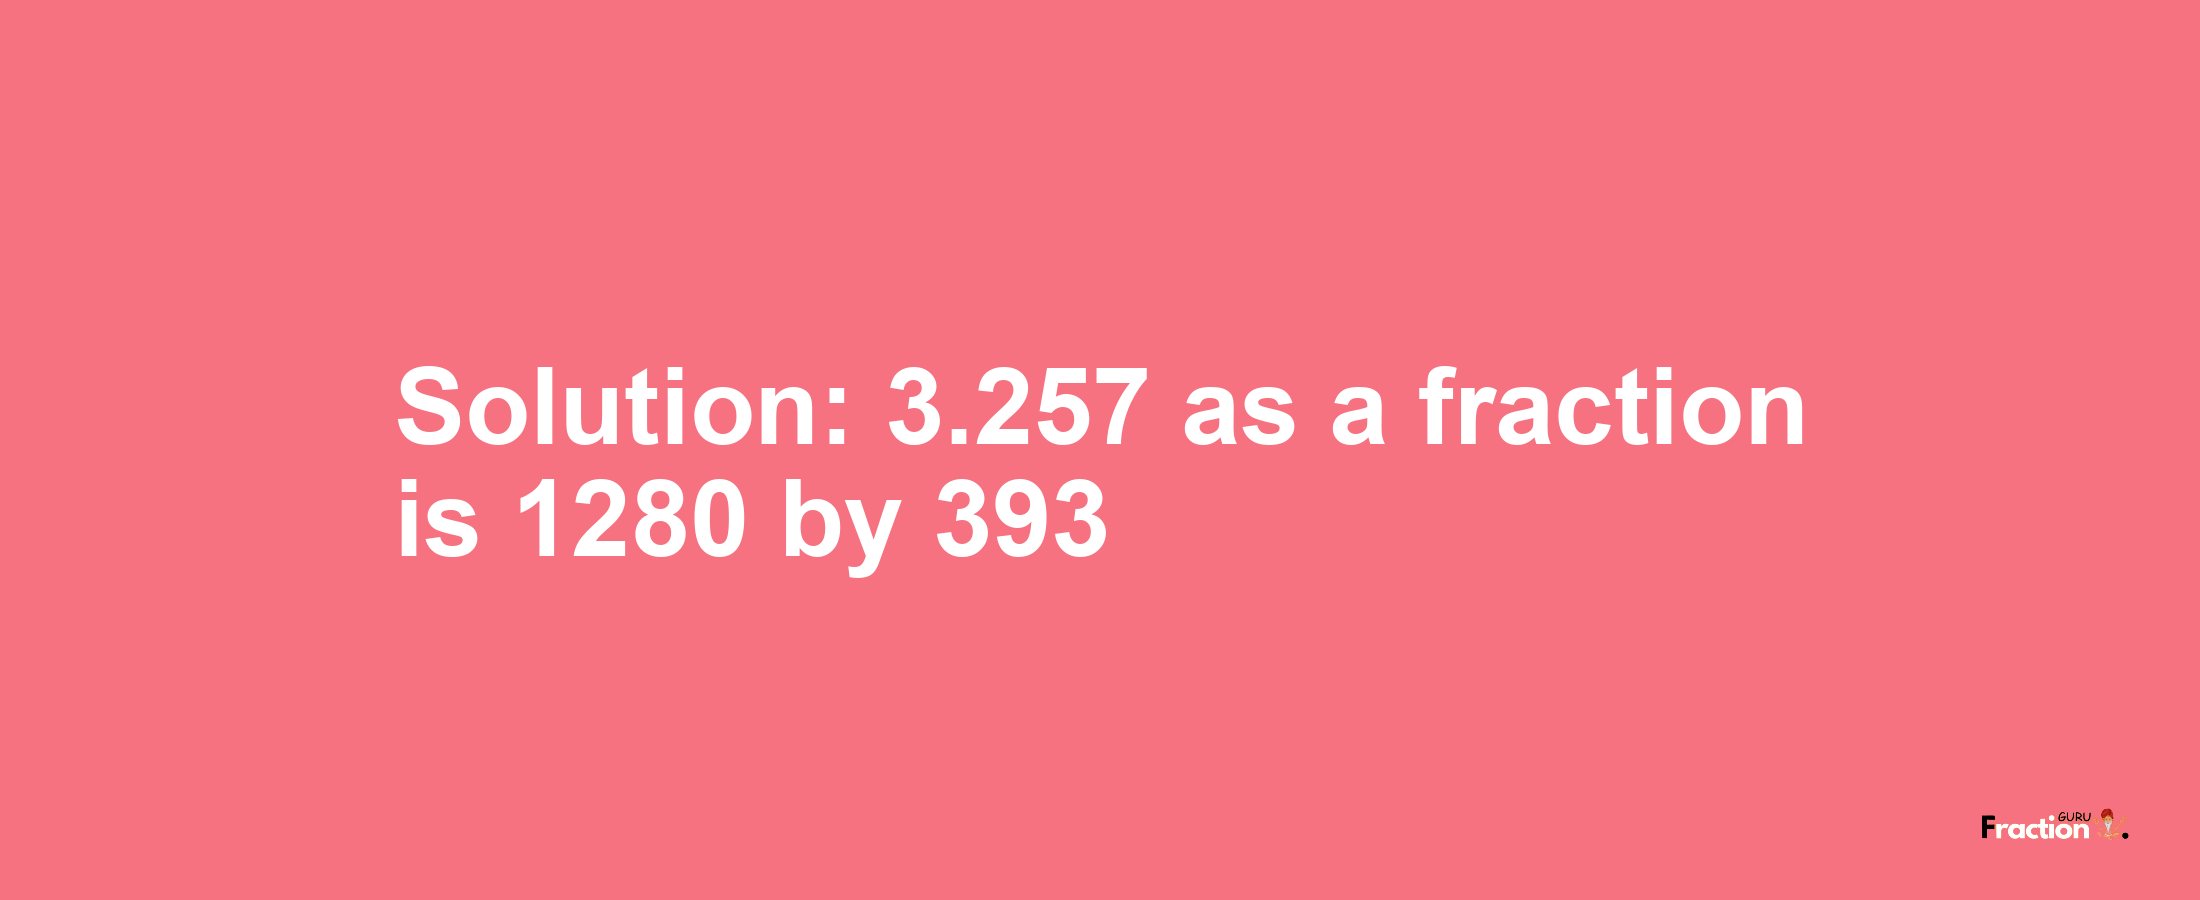 Solution:3.257 as a fraction is 1280/393